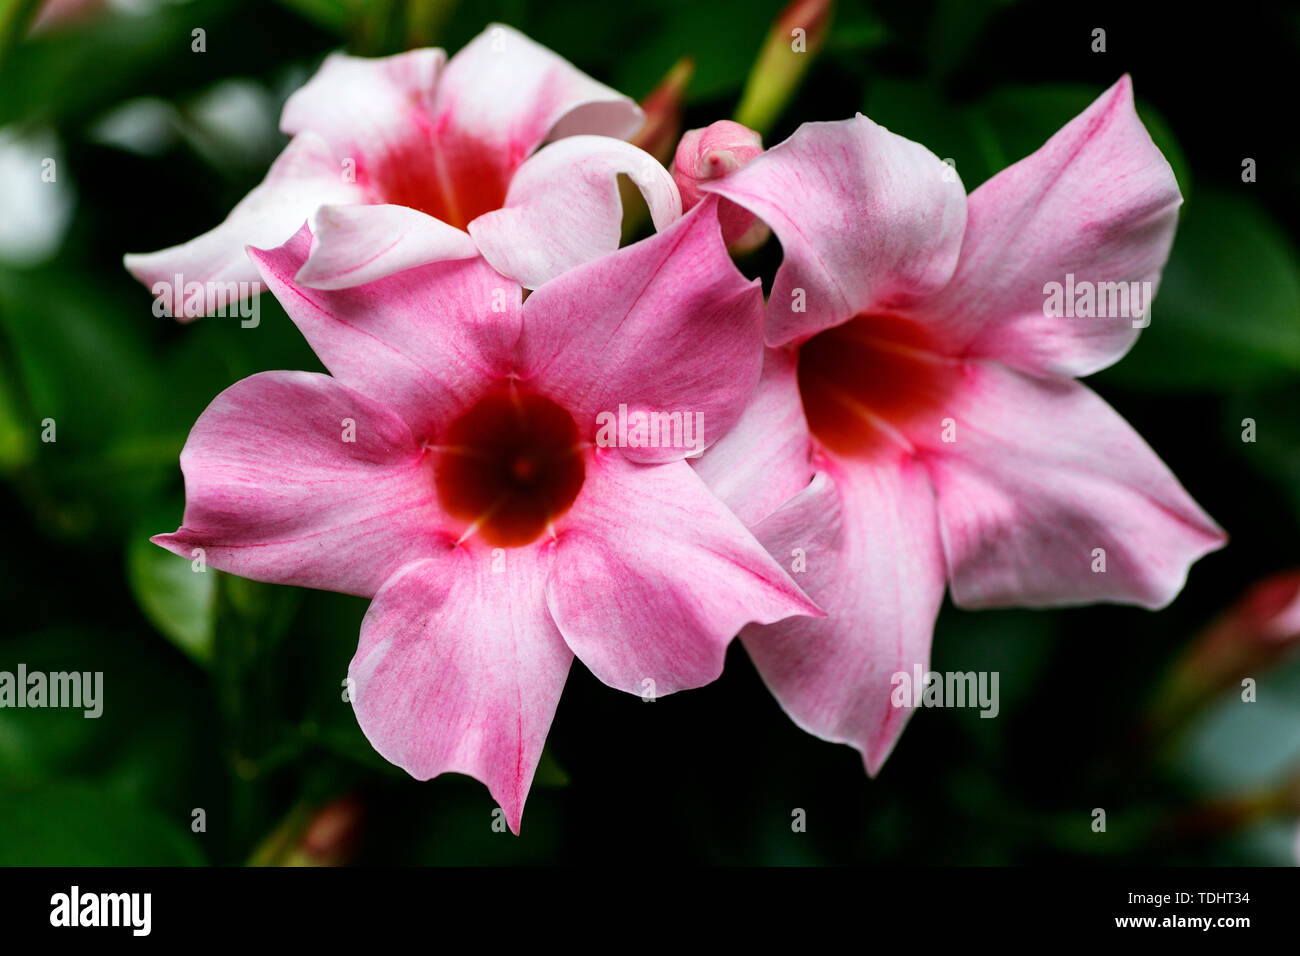 Mandevilla flower Apocynaceae family macro background fine art in high quality prints products fifty megapixels prints Stock Photo